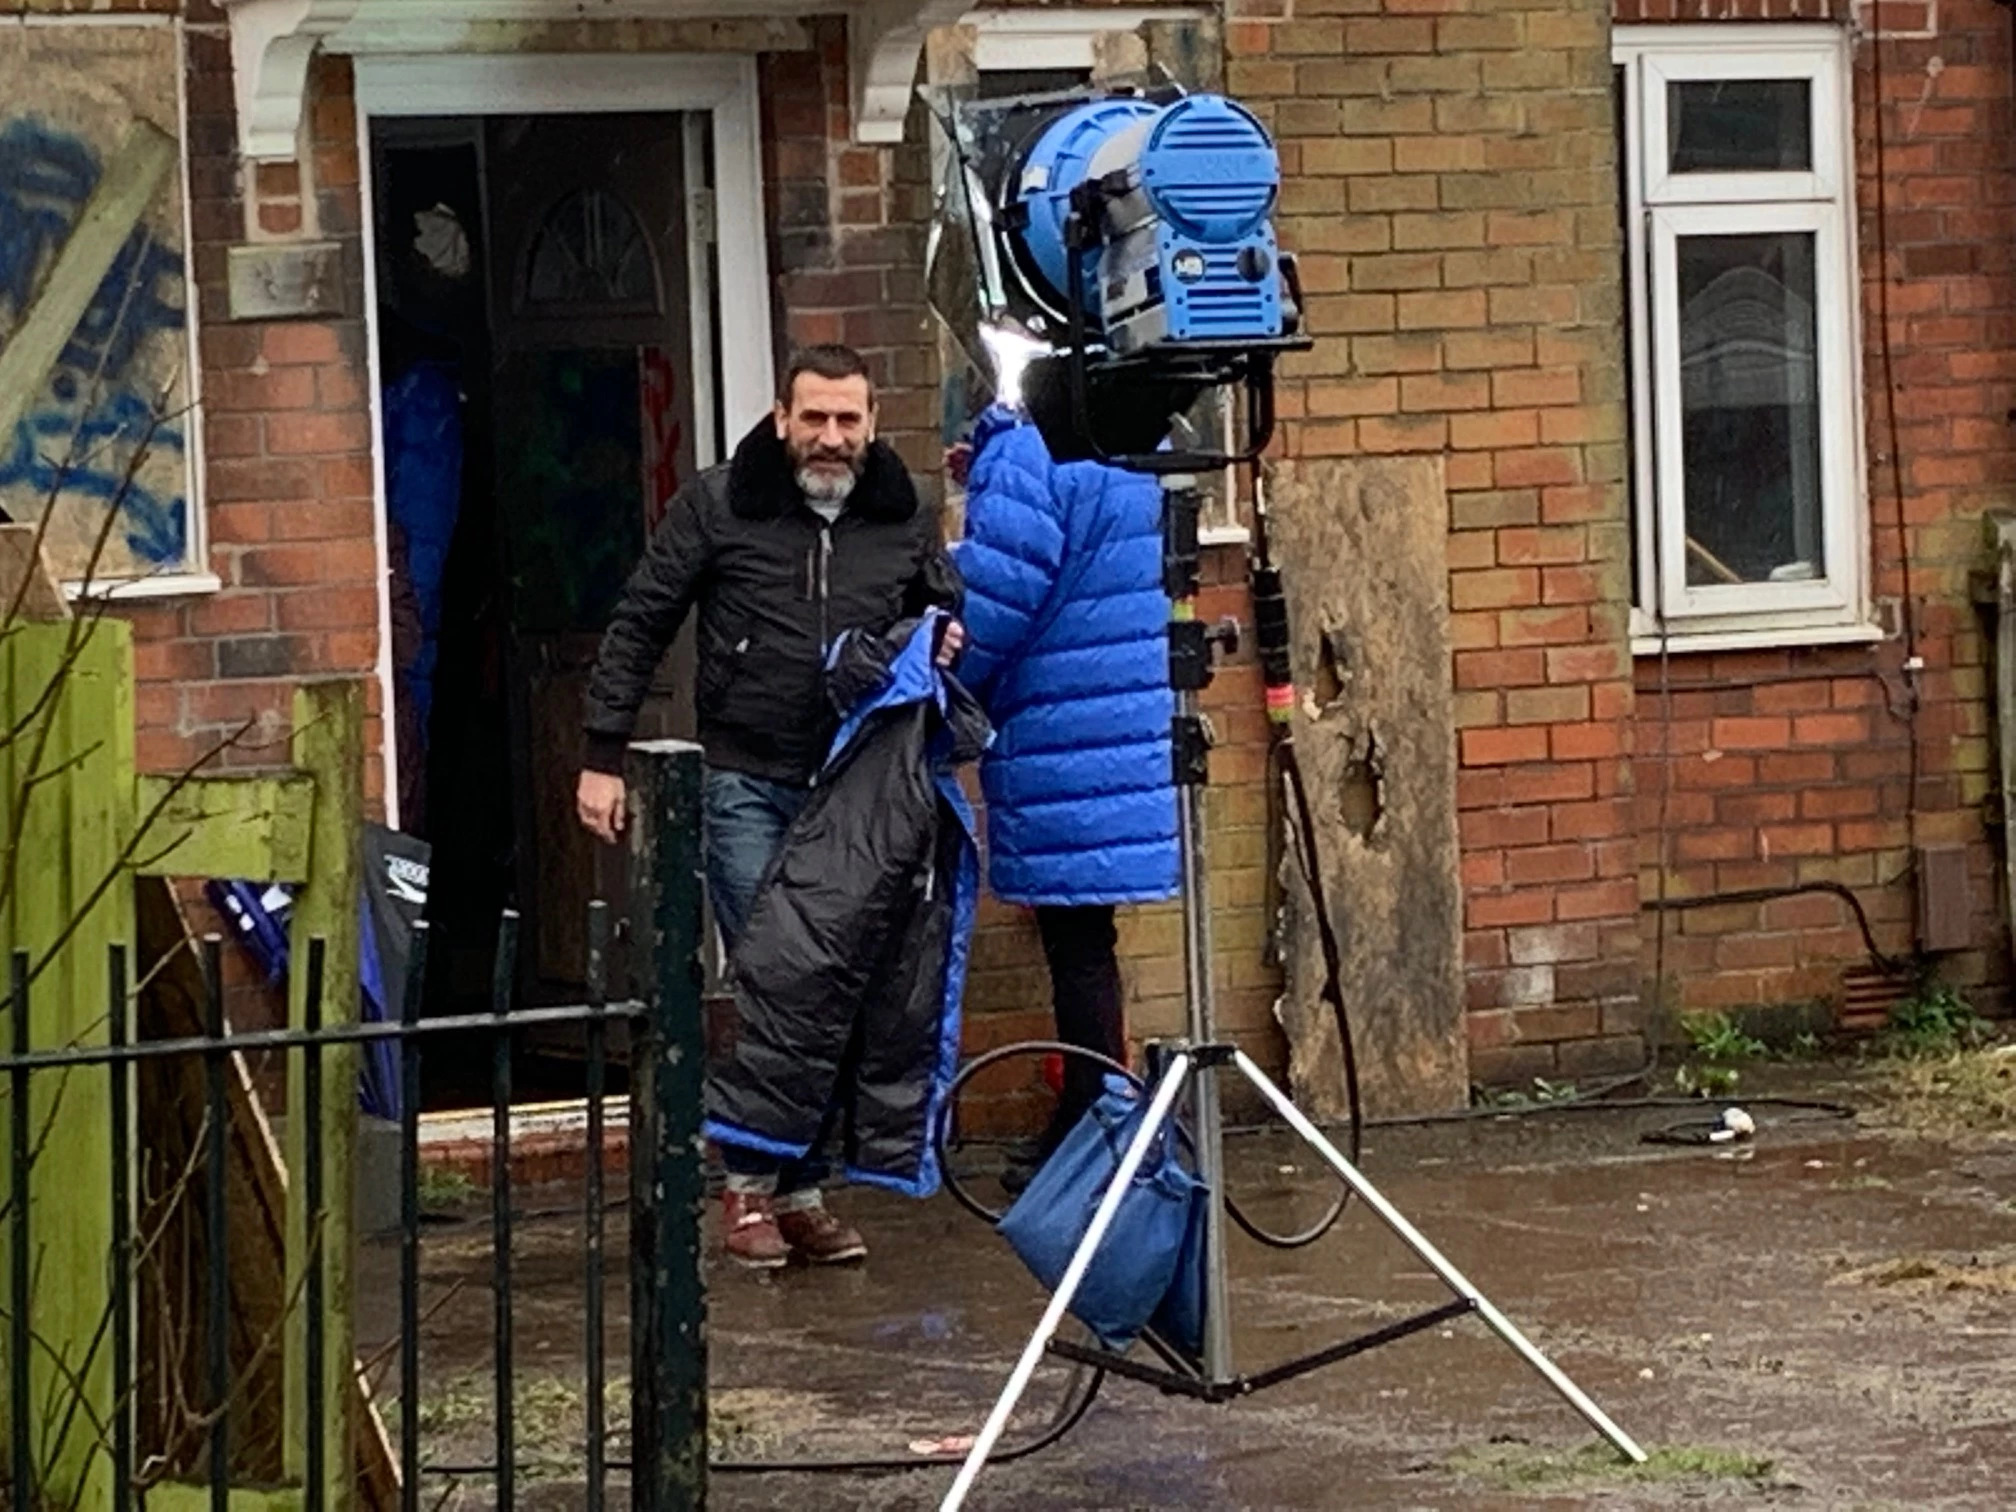 Coronation Street's Peter Barlow filming scenes at a Salix Homes property in Salford  